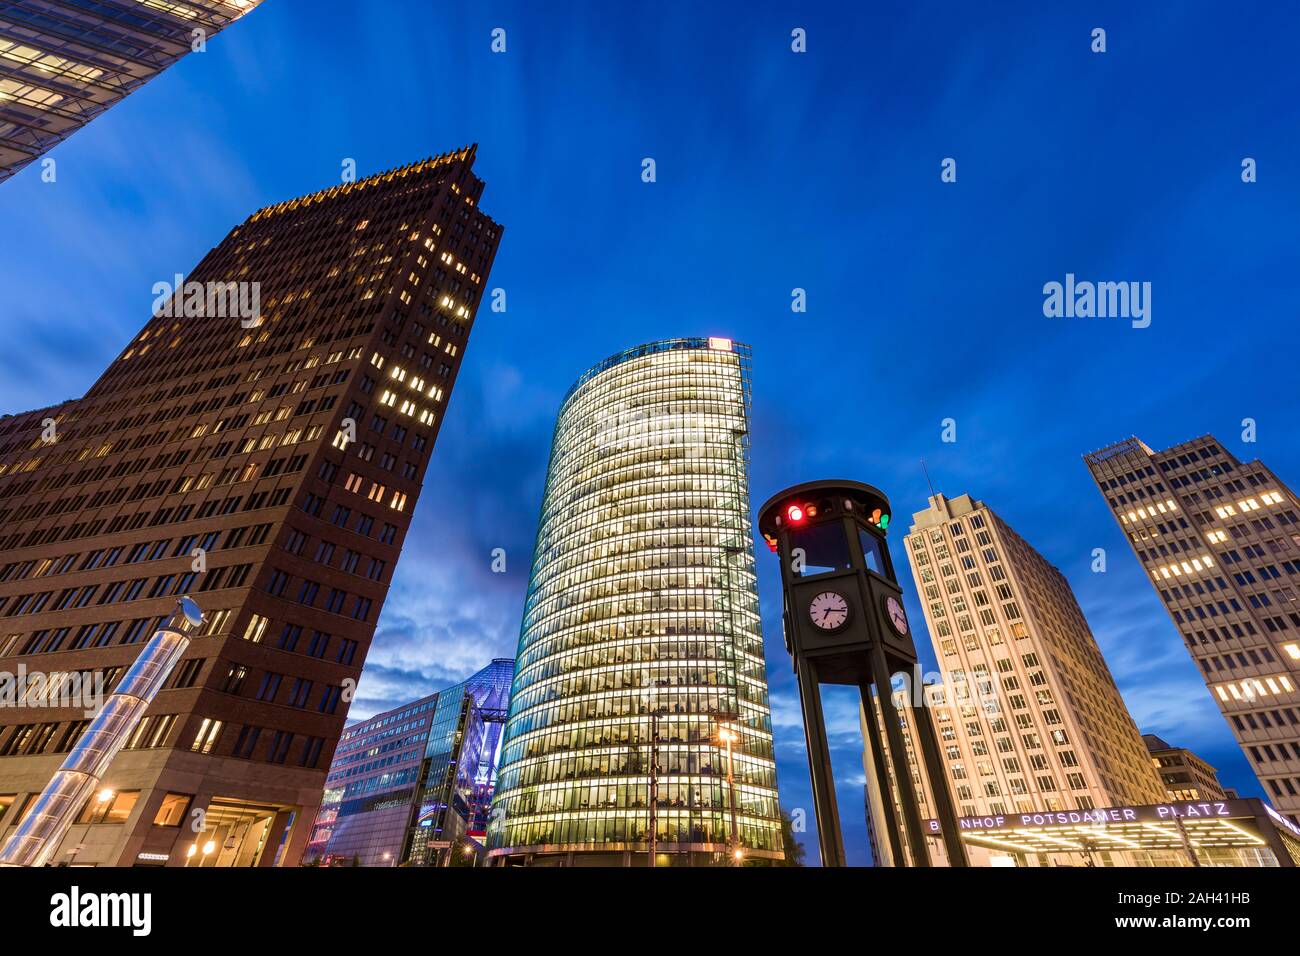 Germany, Berlin, Mitte, Potsdamer Platz, Kollhoff-Tower, Bahntower, Beisheim-Center, Low angle view of skyscrapers at dusk Stock Photo